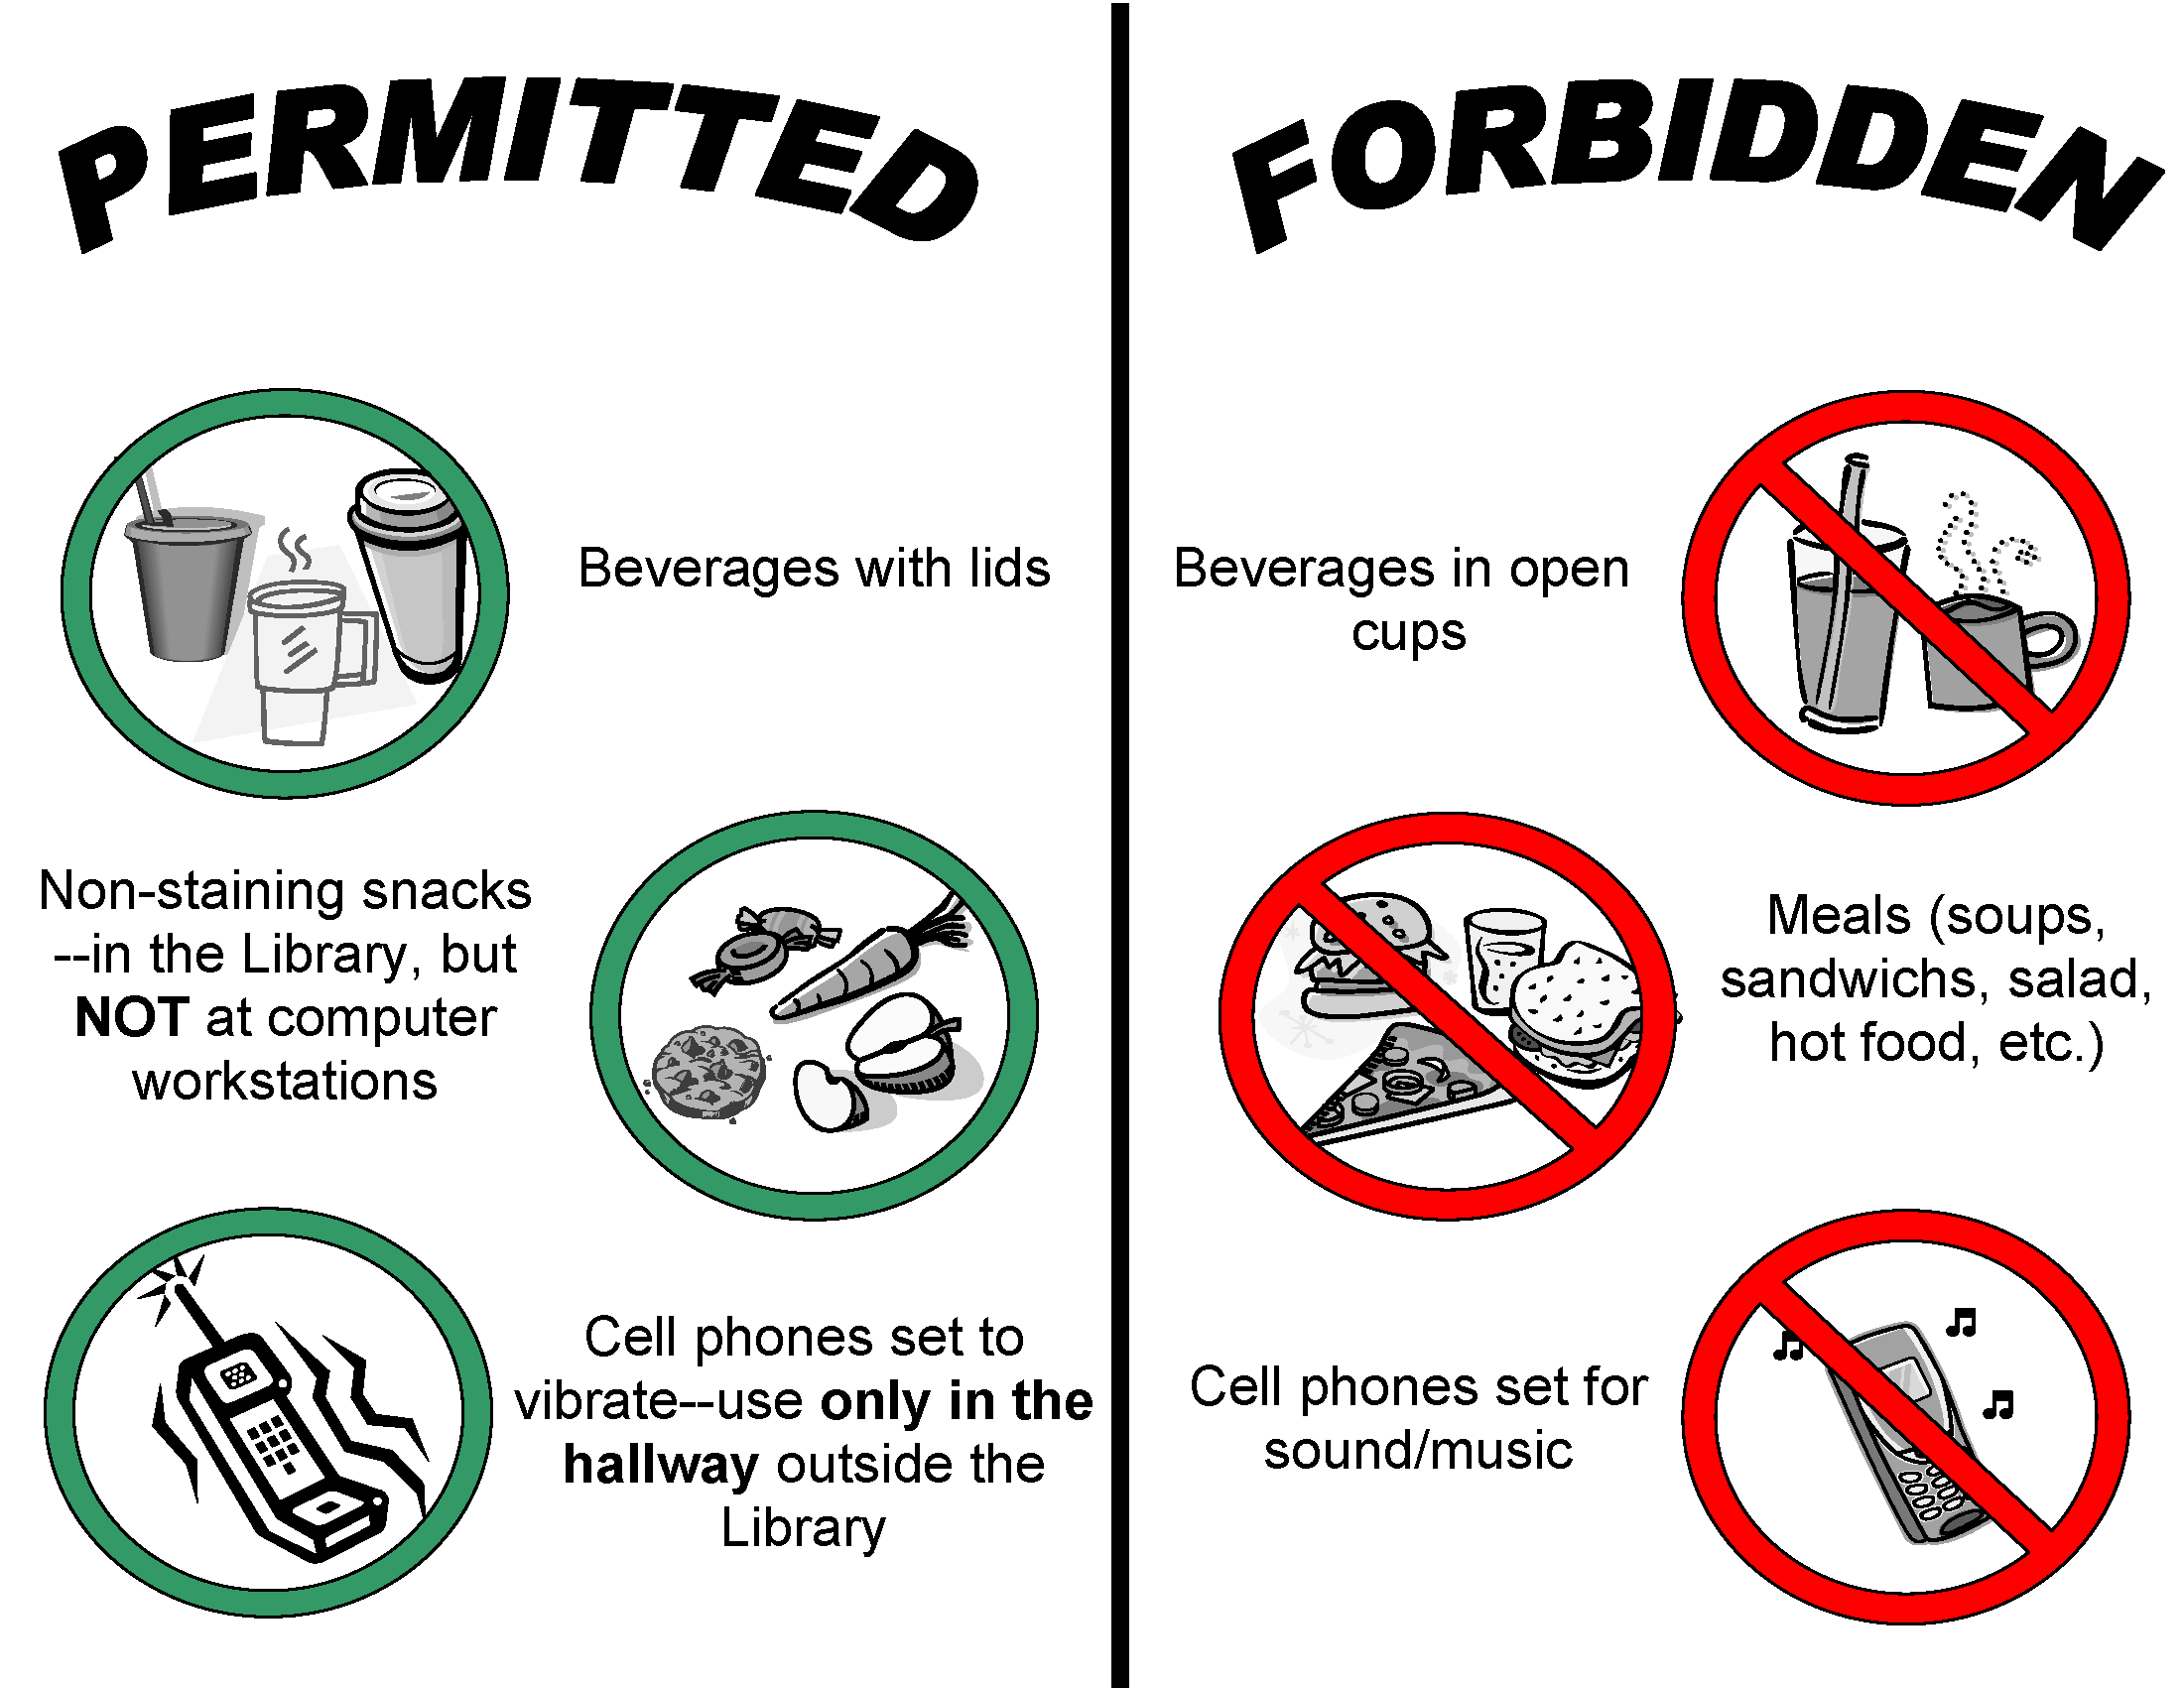 Permitted - beverages with lids, non-staining snacks, cell phones on vibrate. Forbidden - beverages without lids, meals (soups, salads, hot meals), cell phones with sound on.